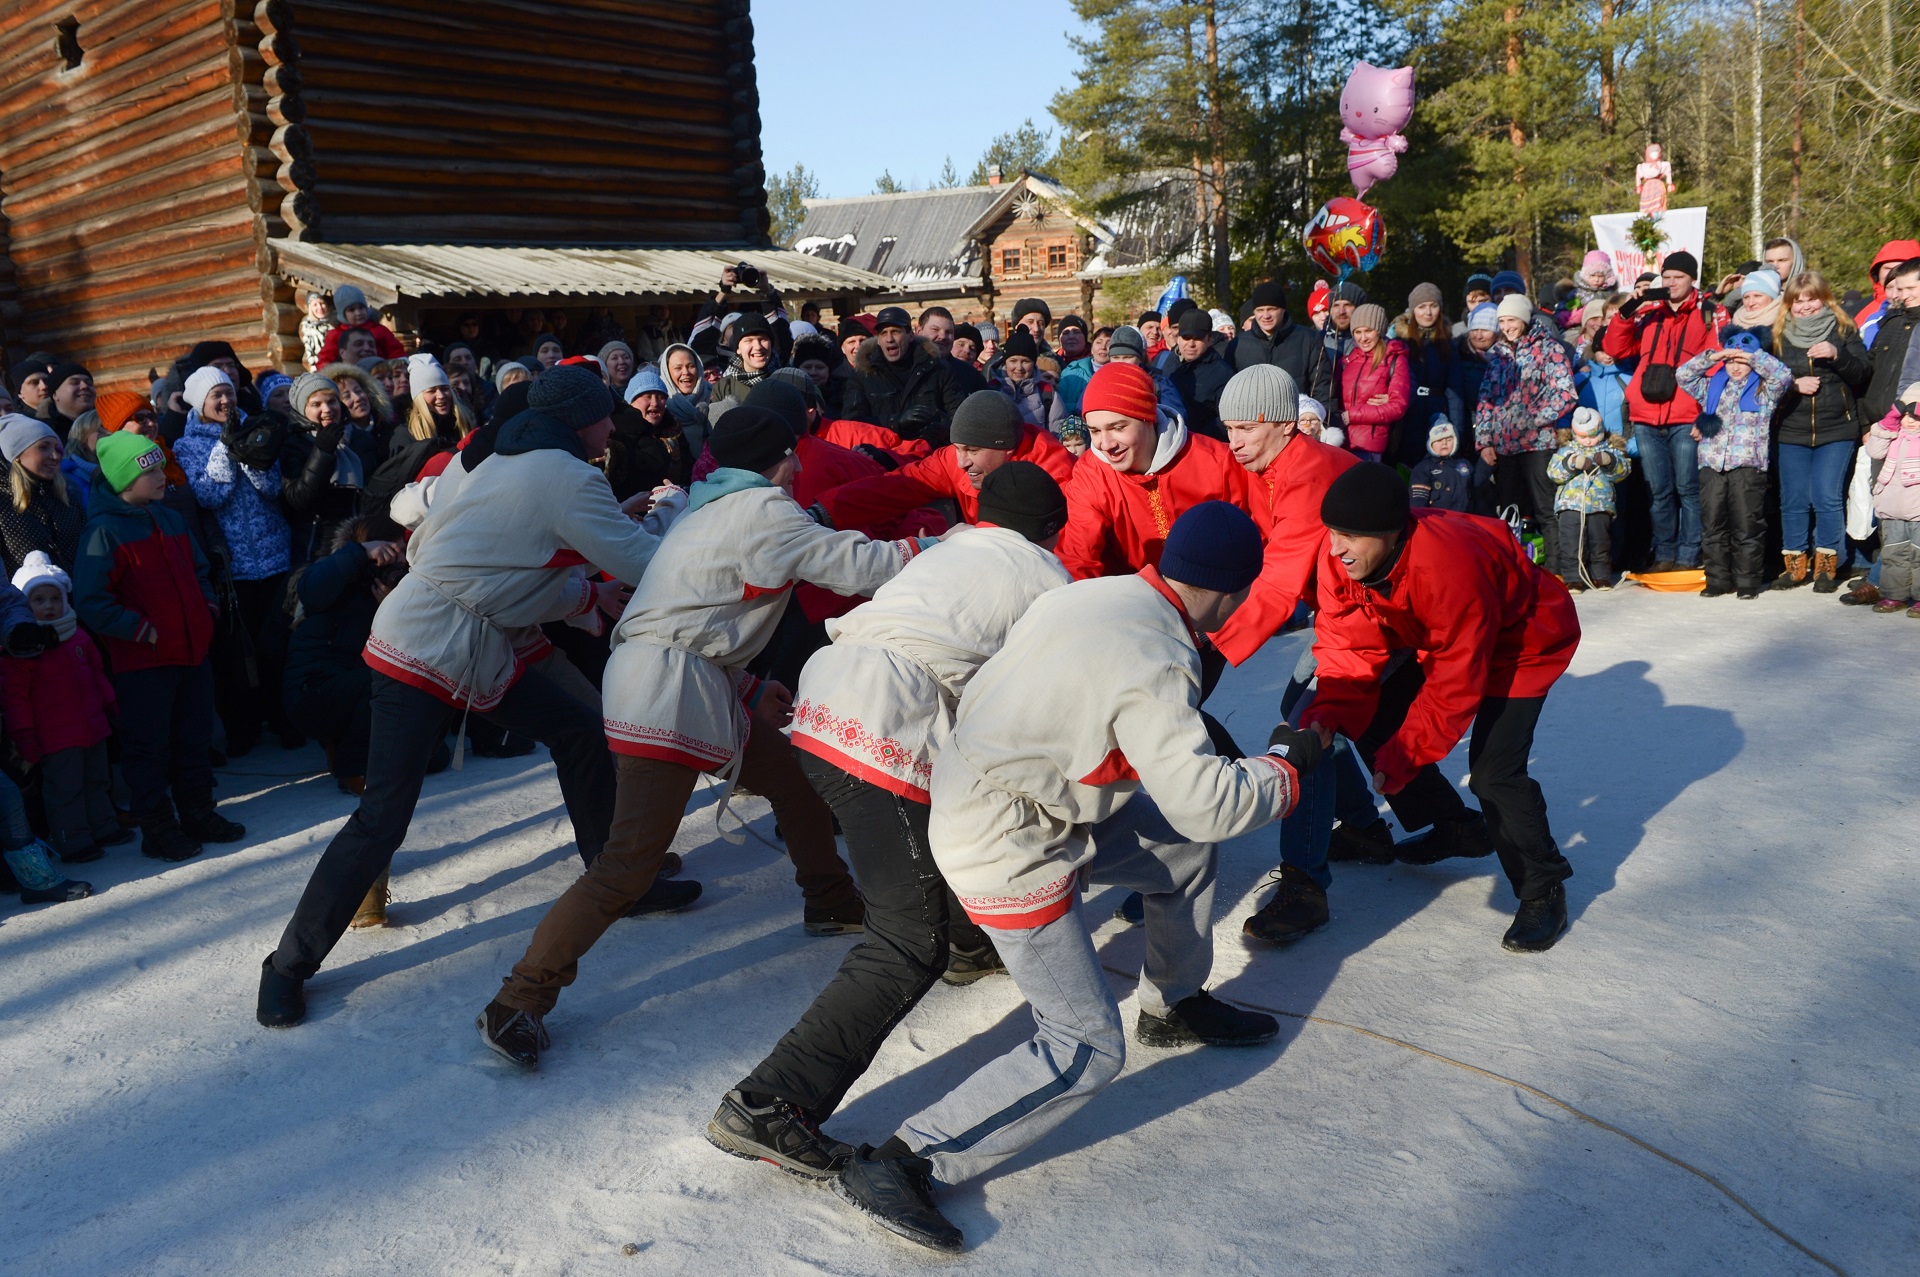 2806359 03/13/2016 A traditional wall-to-wall fist fight during Maslenitsa festival at the Malye Korely Museum of Wooden Architecture and Folk Art, in the Arkhangelsk region. Vladimir Trefilov/Sputnik